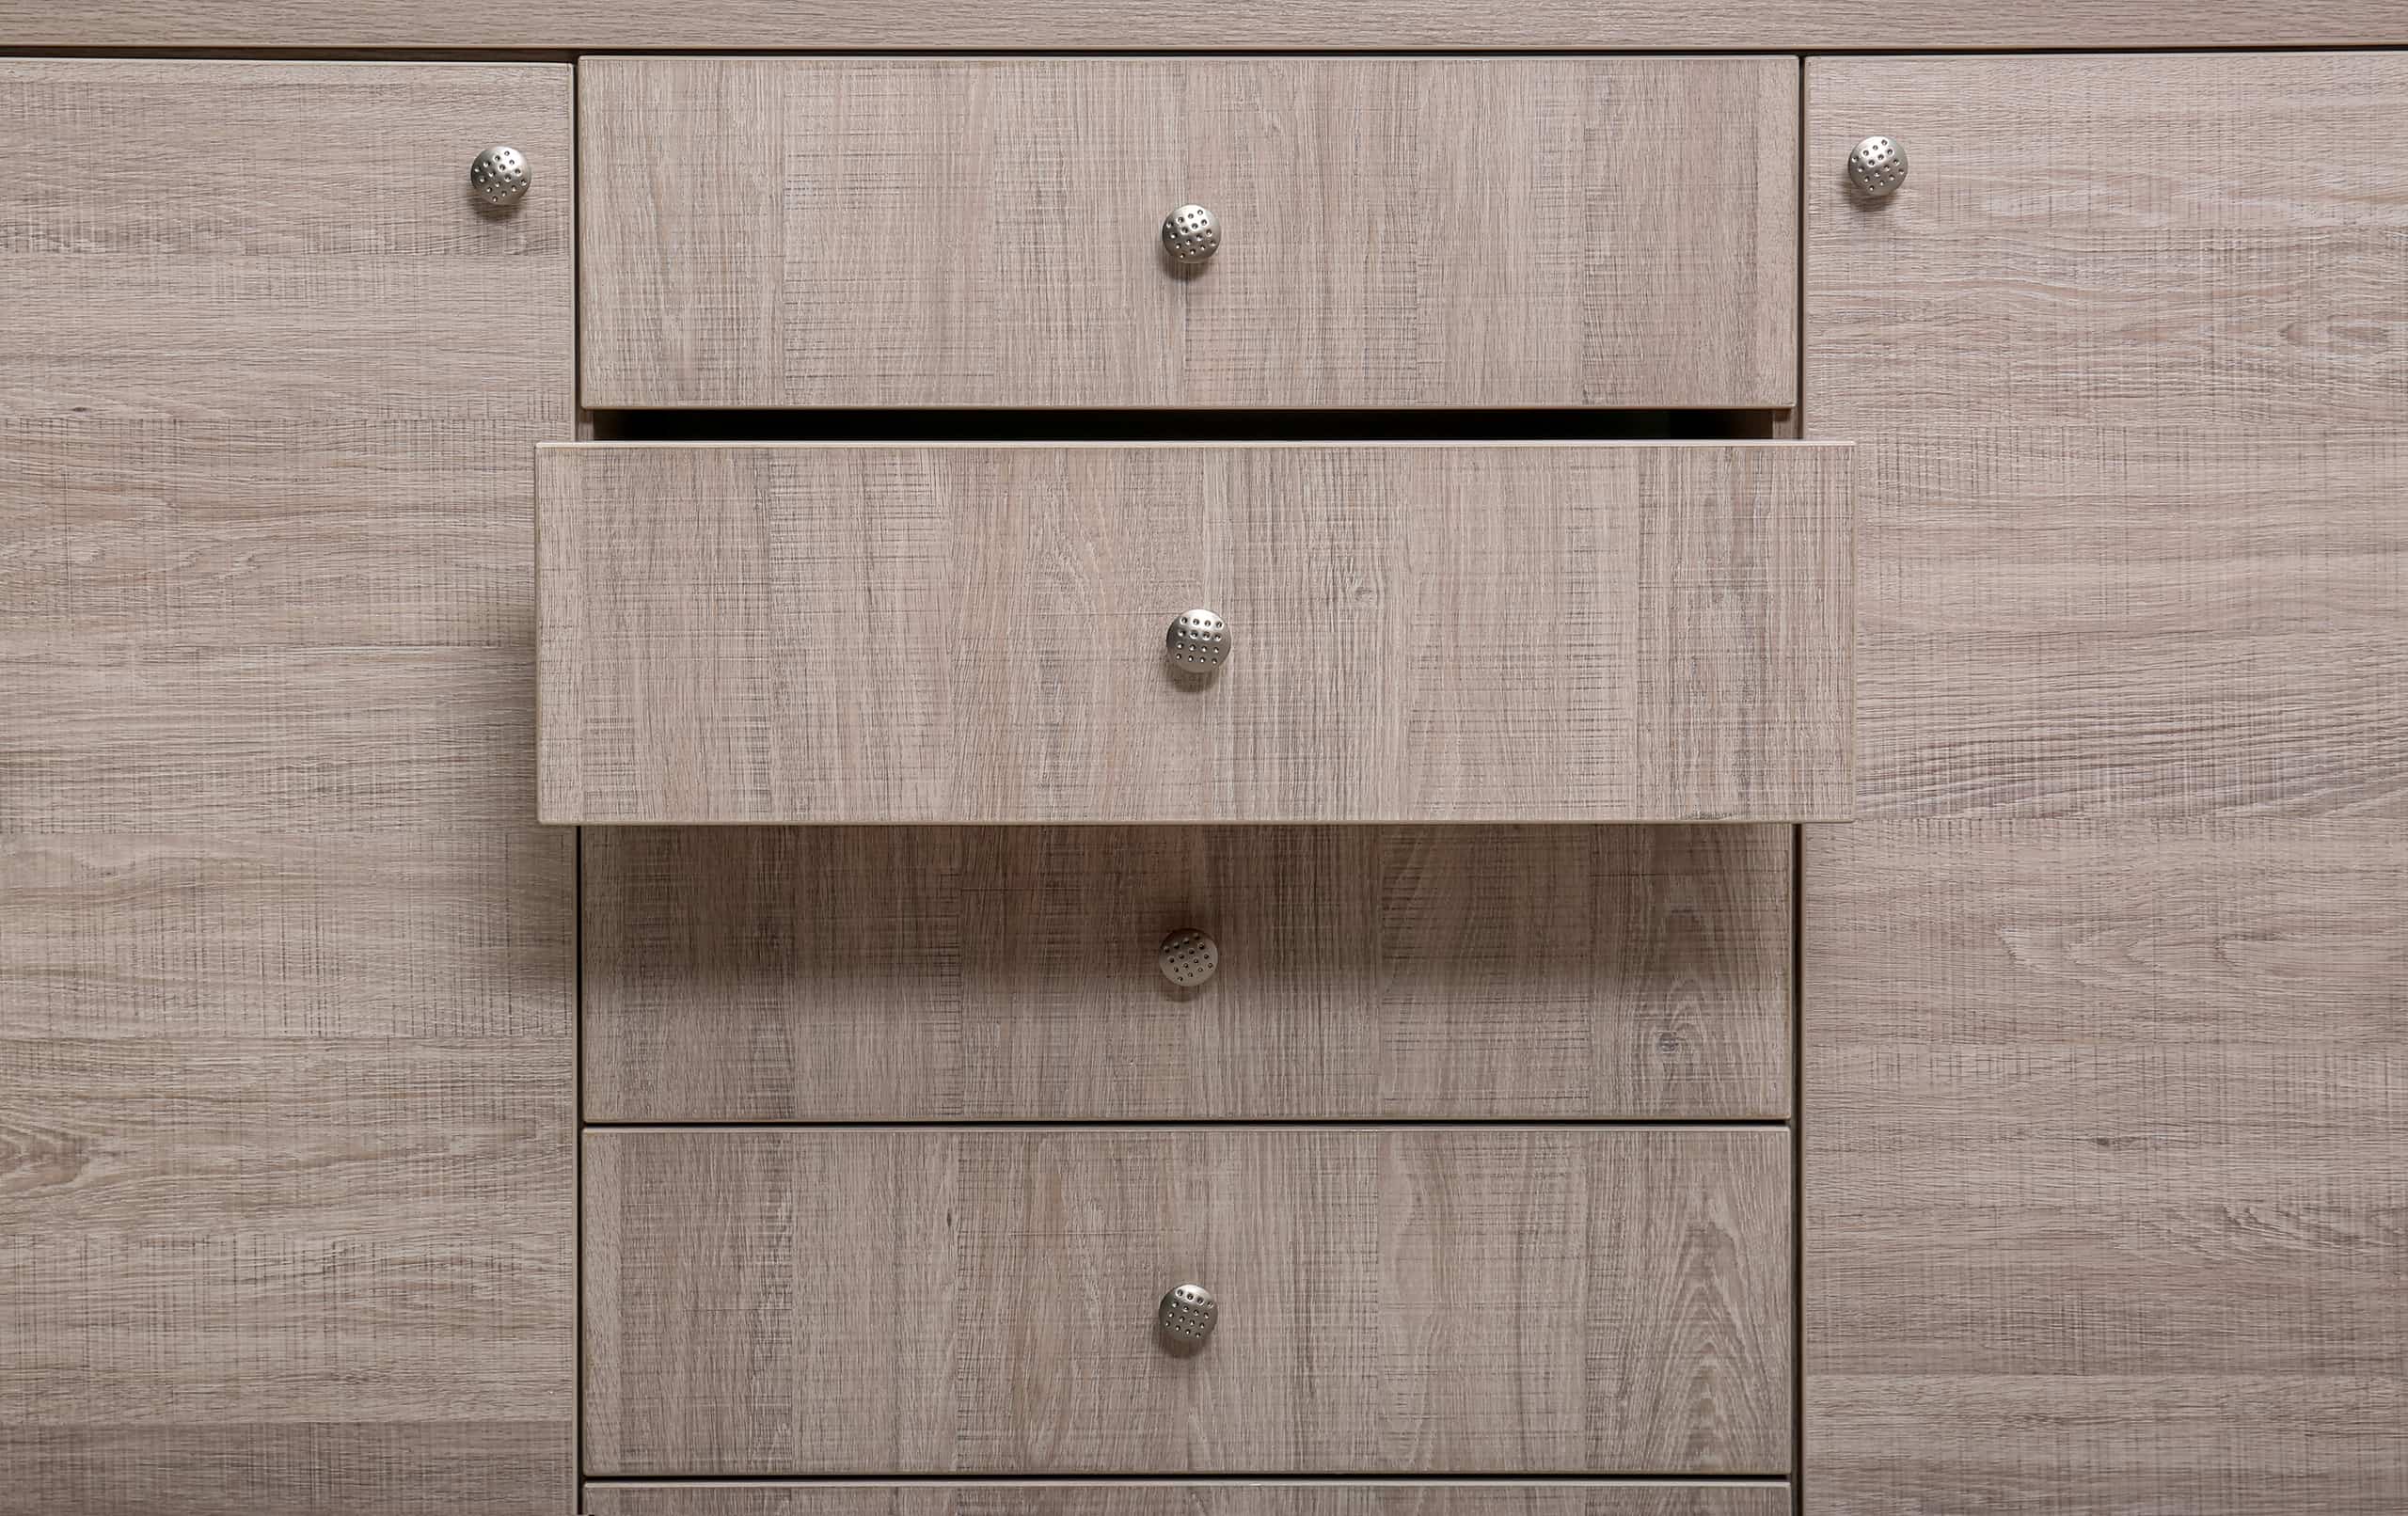 Cabinet Hardware Placement Guide, Where To Put Knobs On Cabinet Drawers